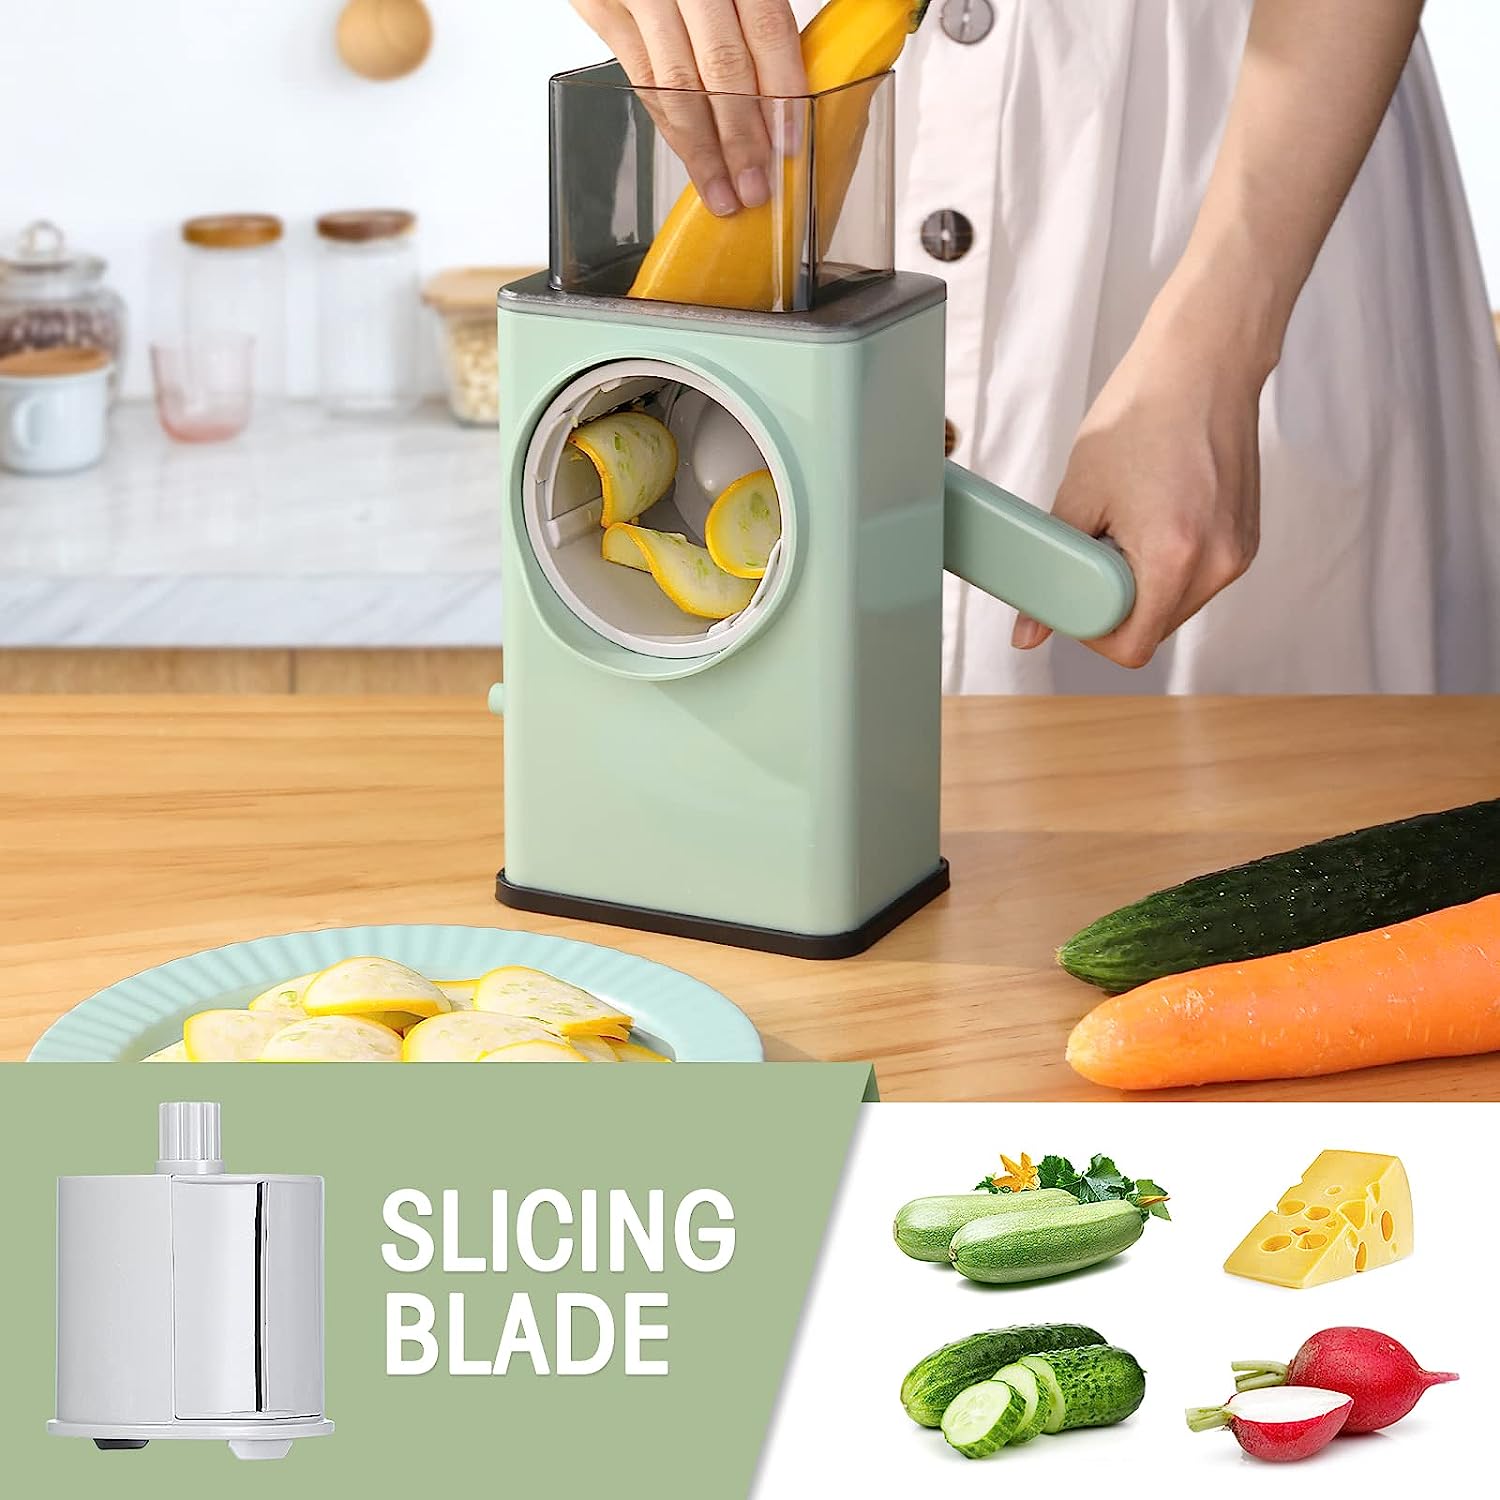 Rotary cheese and vegetable grater - green